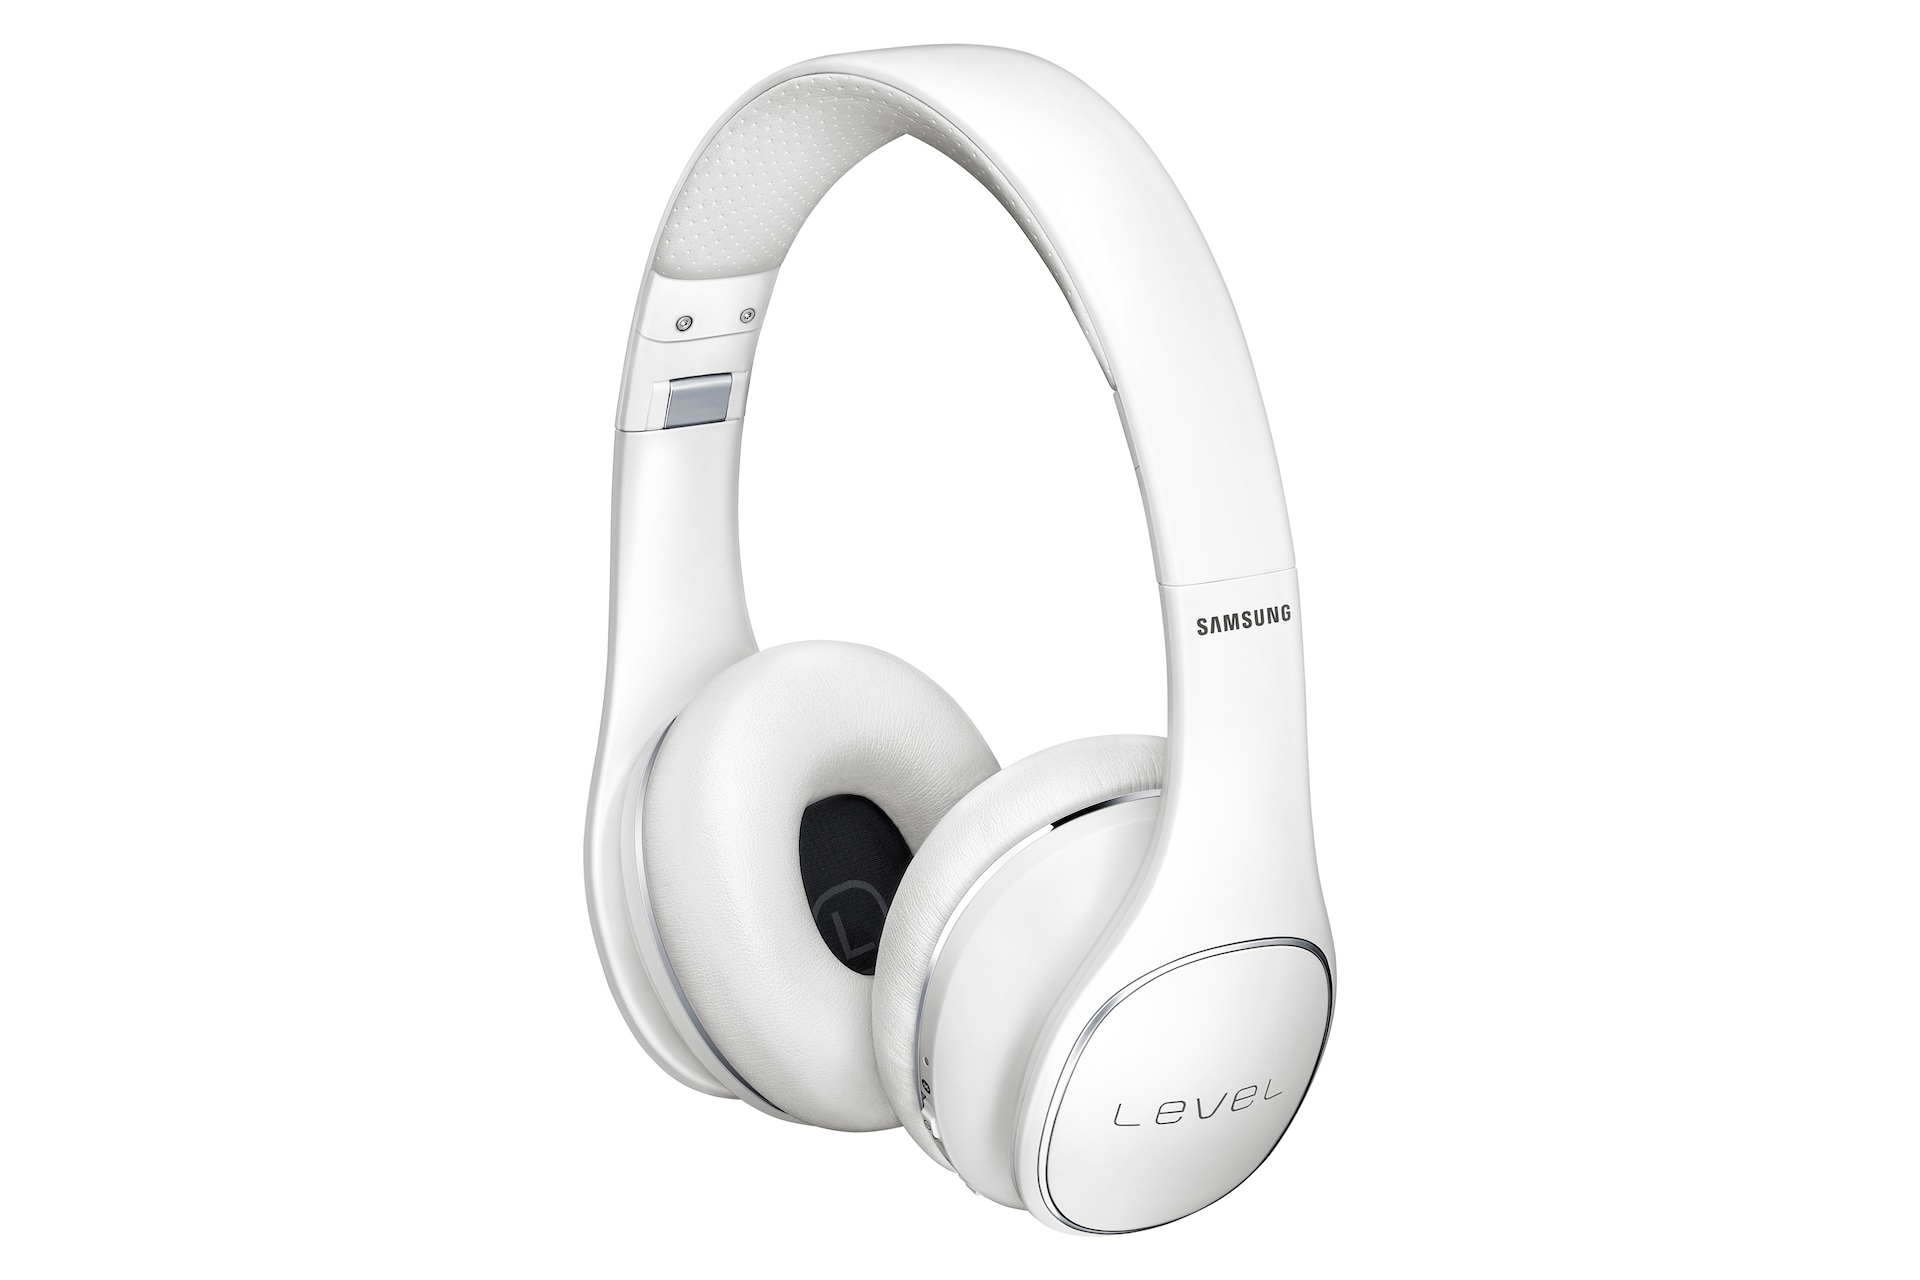 br-level-on-wireless-headset-pn900-eo-pn900bwpgbr-000079122-r-perspective-white-10049814002736